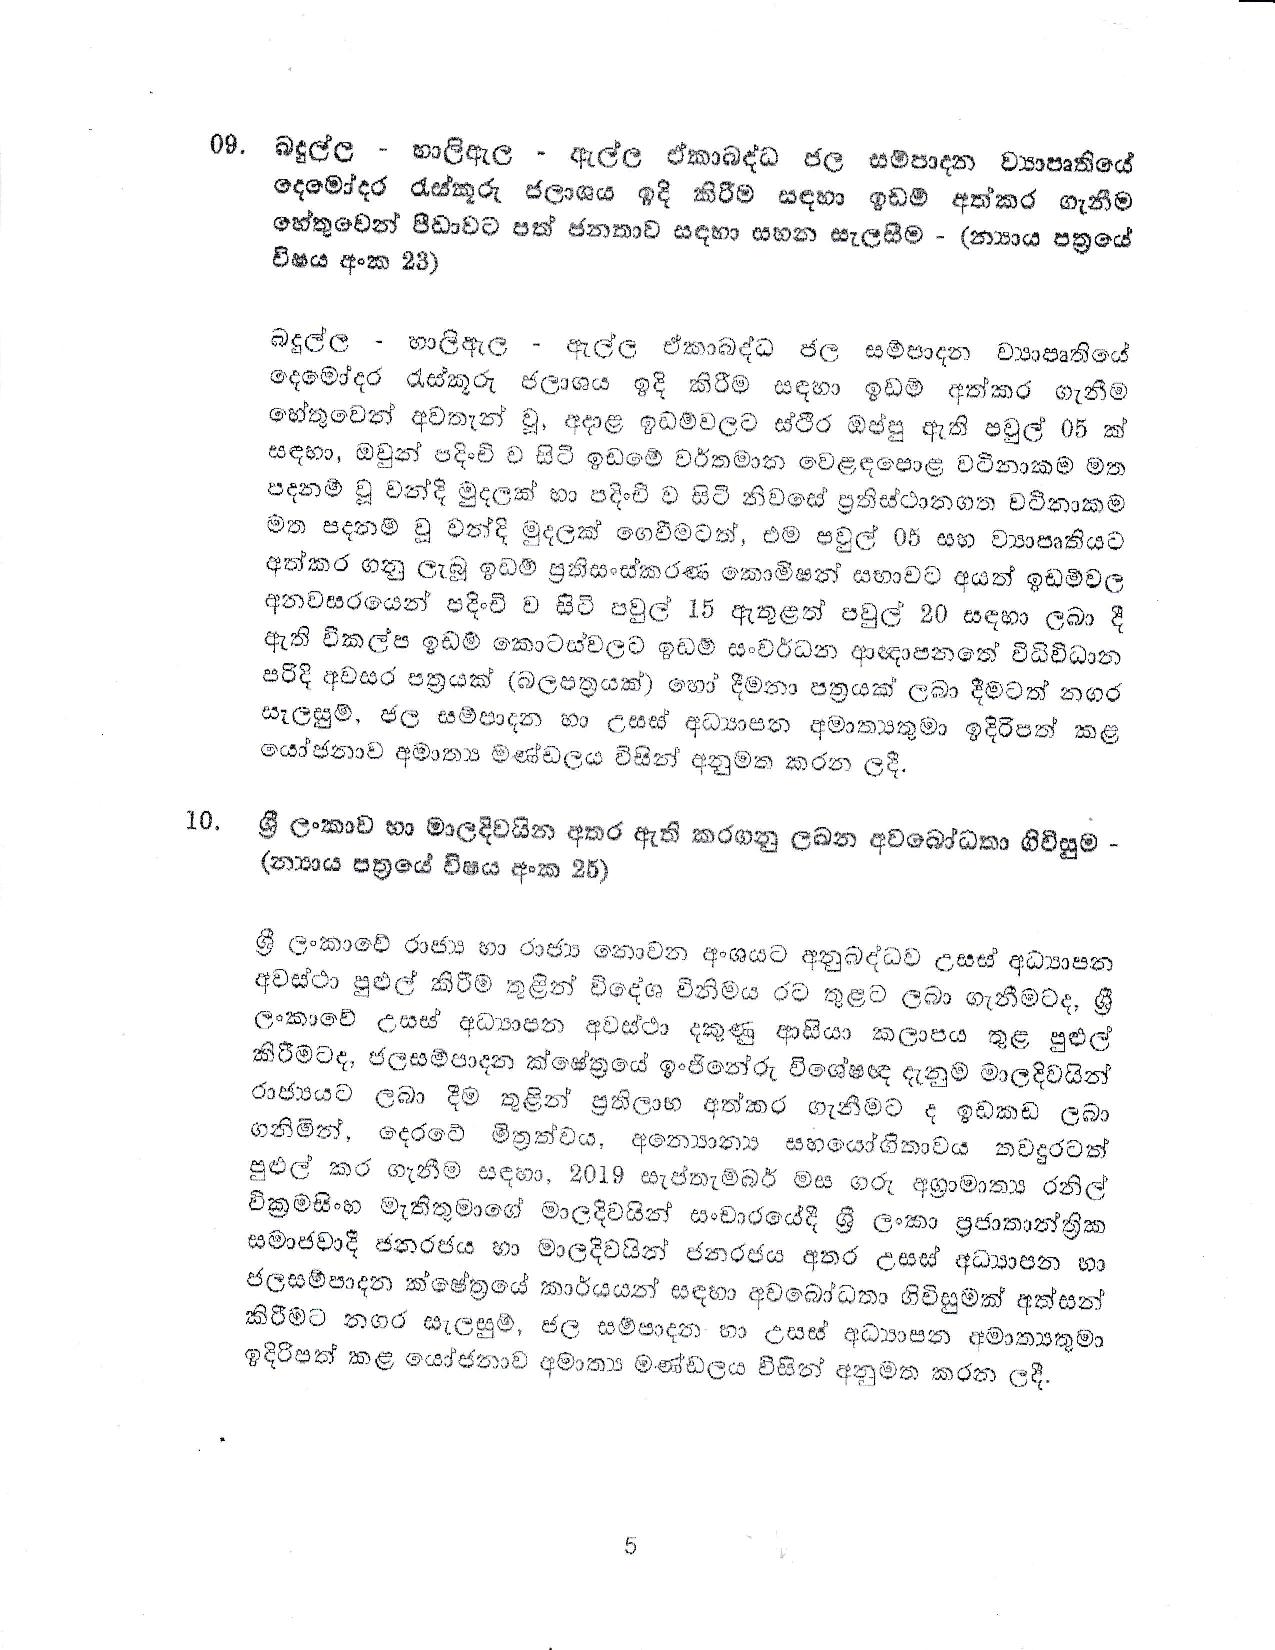 Cabinet Decision 27.08.2019 page 005